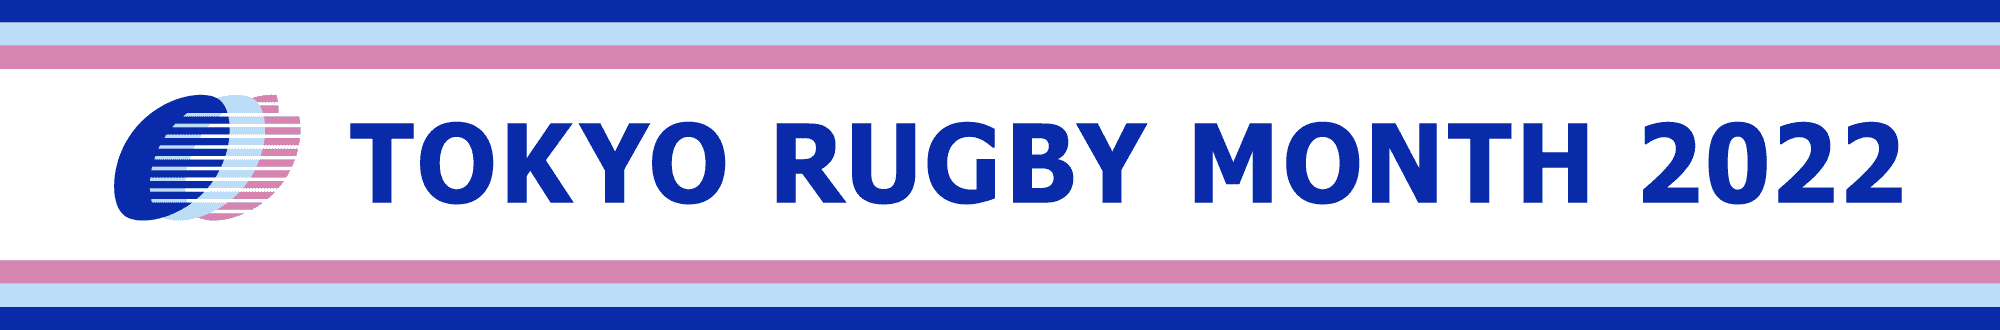 TOKYO RUGBY MONTH 2022